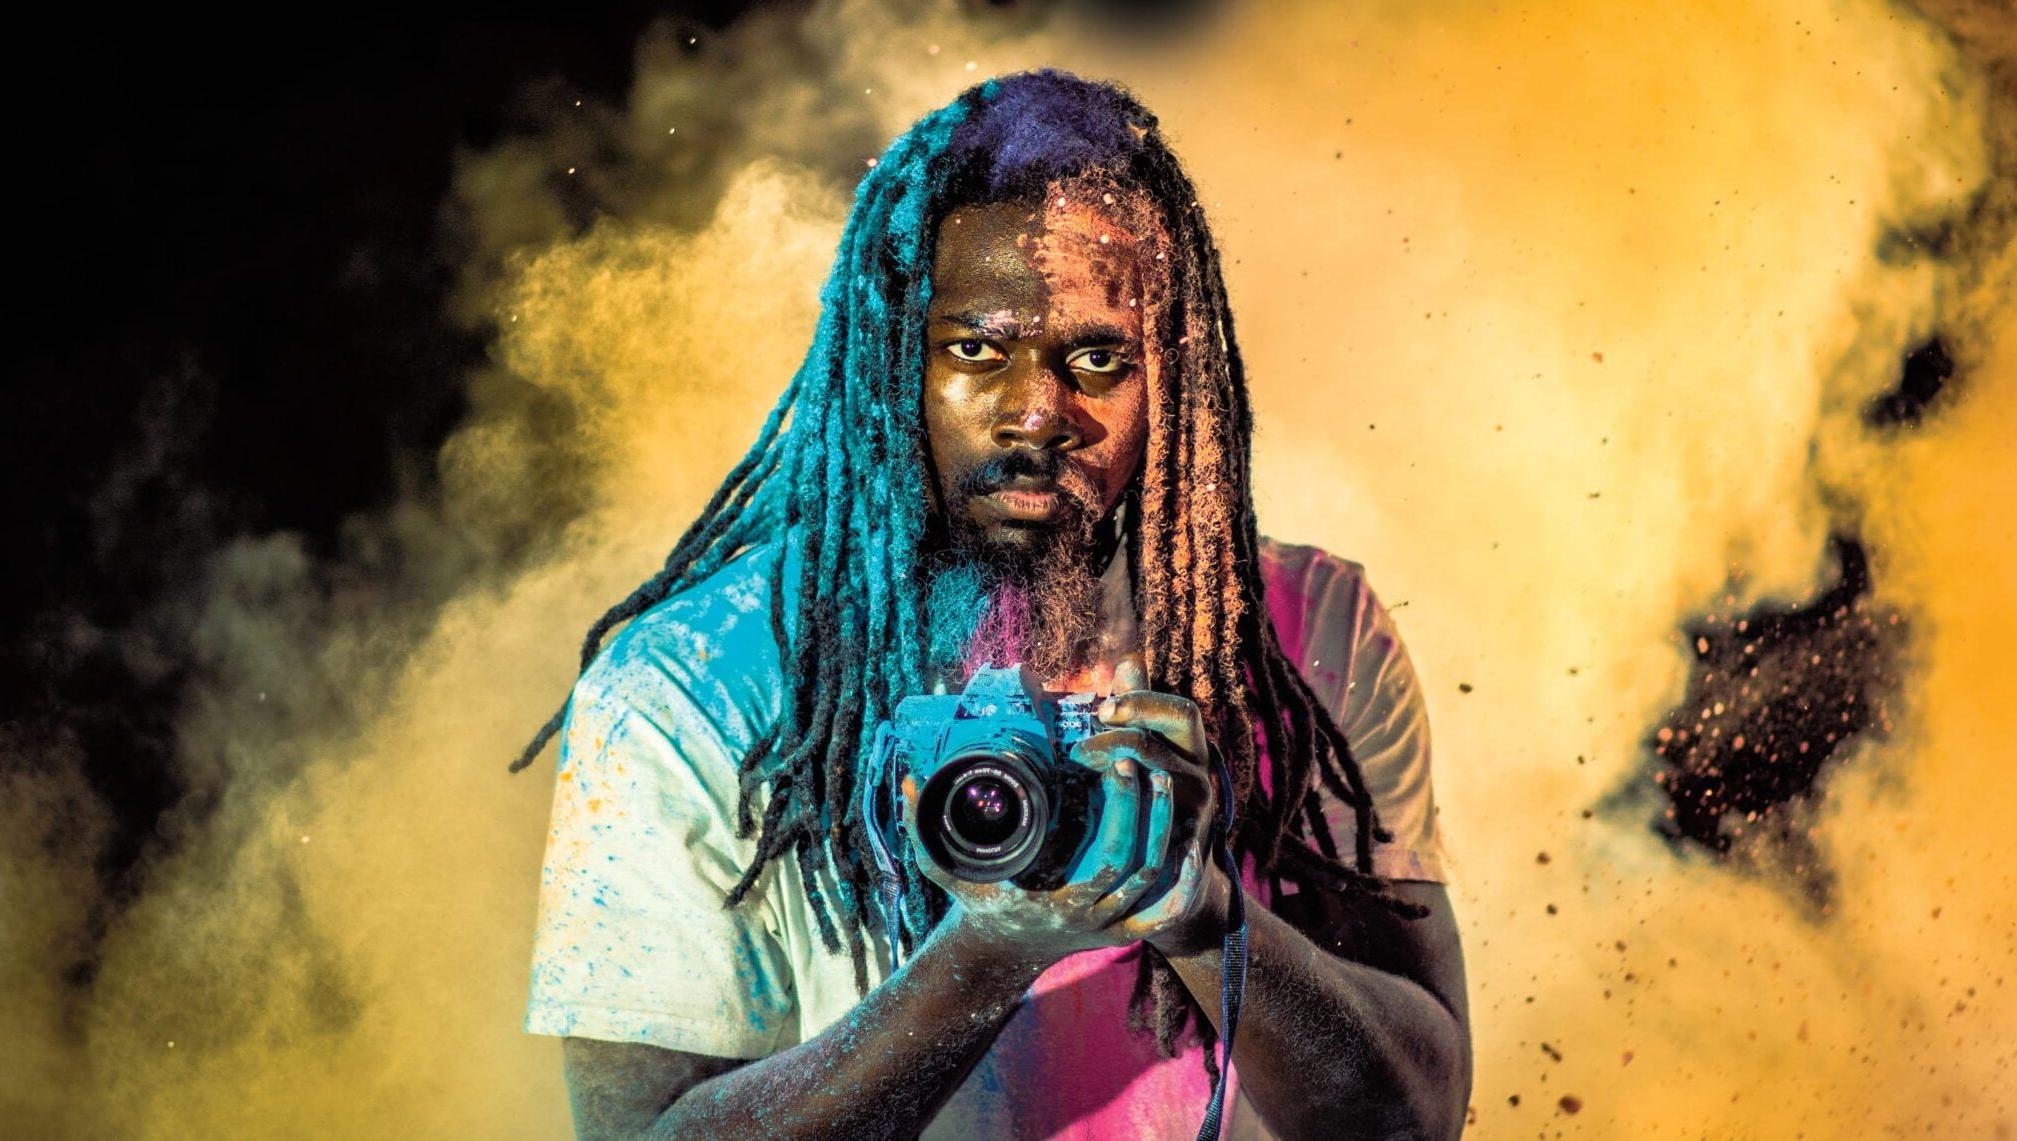 A photographer holds his camera in the midst of a cloud of colorful smoke or dust